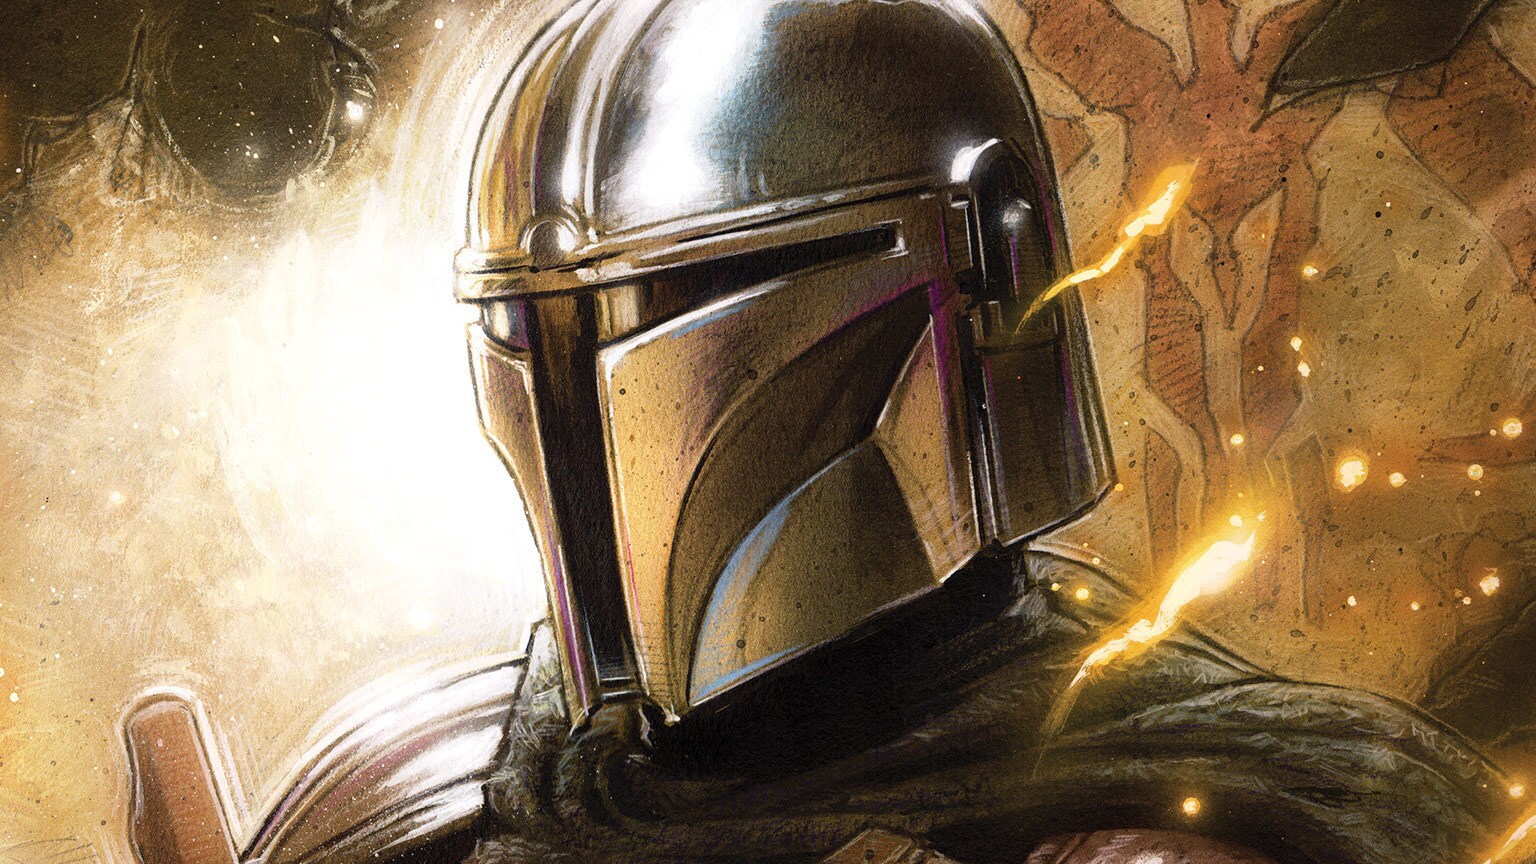 The Hunt is On in Marvel’s Star Wars: The Mandalorian #2 - Exclusive Preview